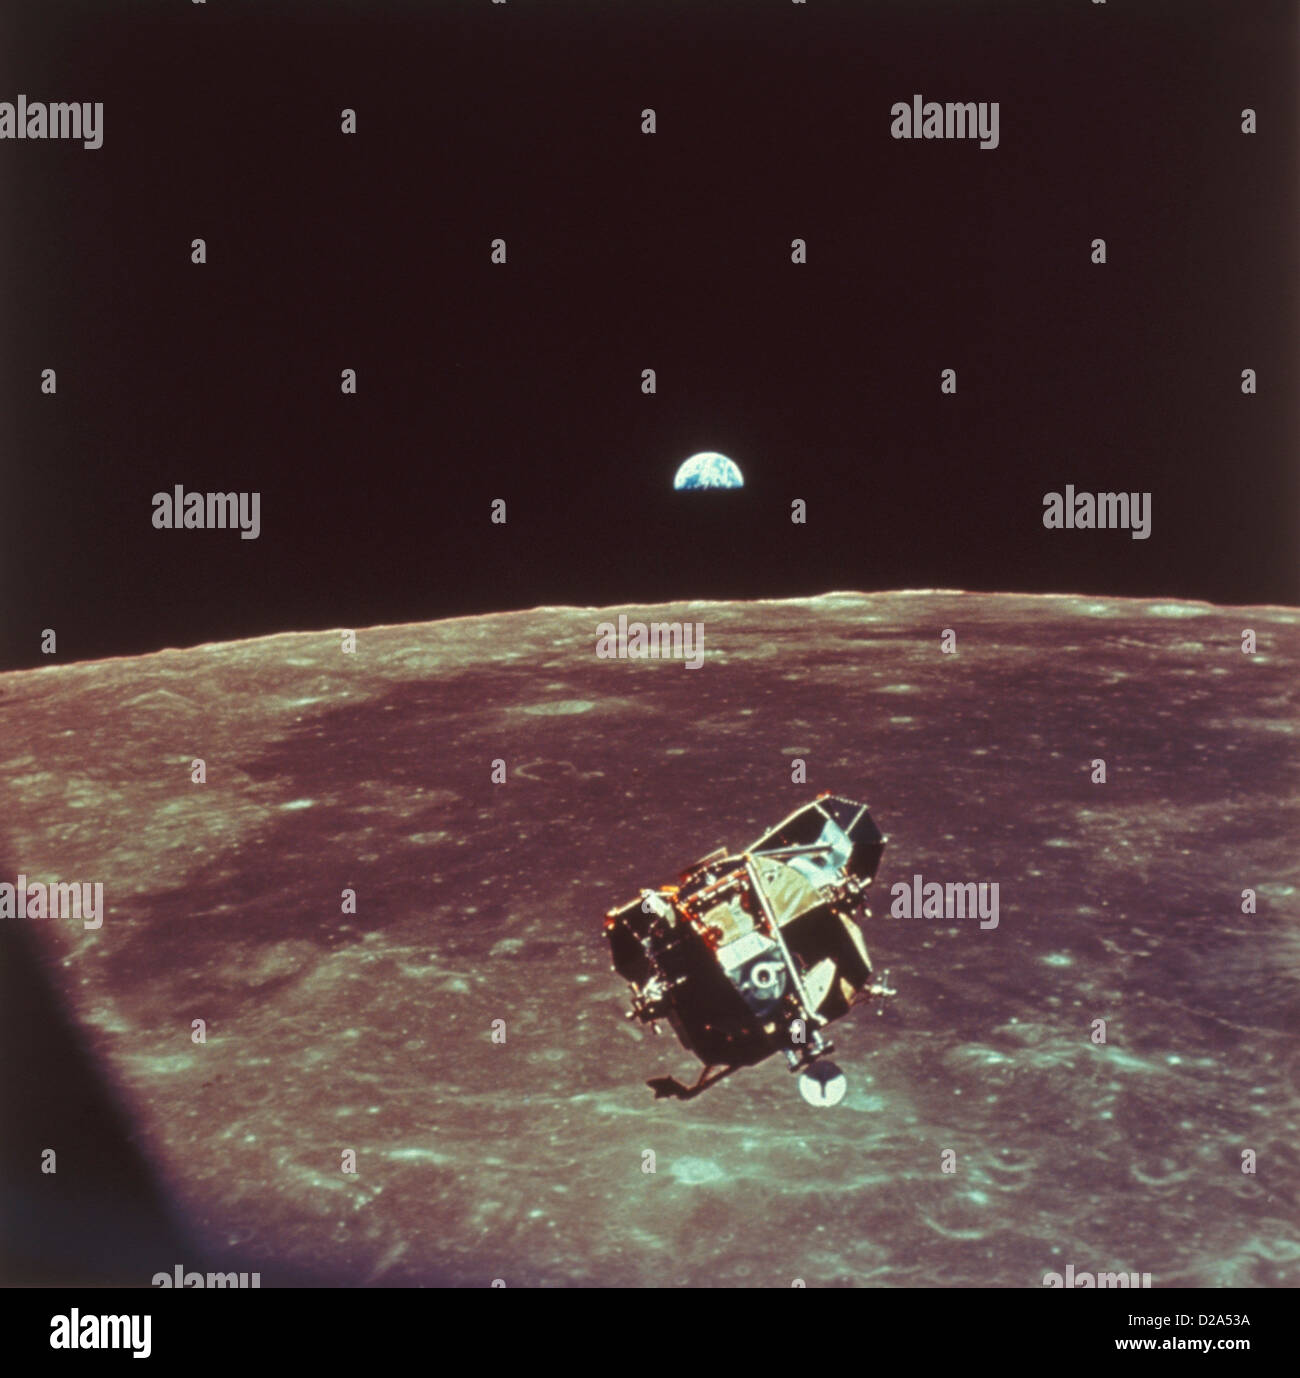 The Lunar Module Is Making Its Docking Approach To The Command Service Mode. The Earth Rises In The Background. Stock Photo